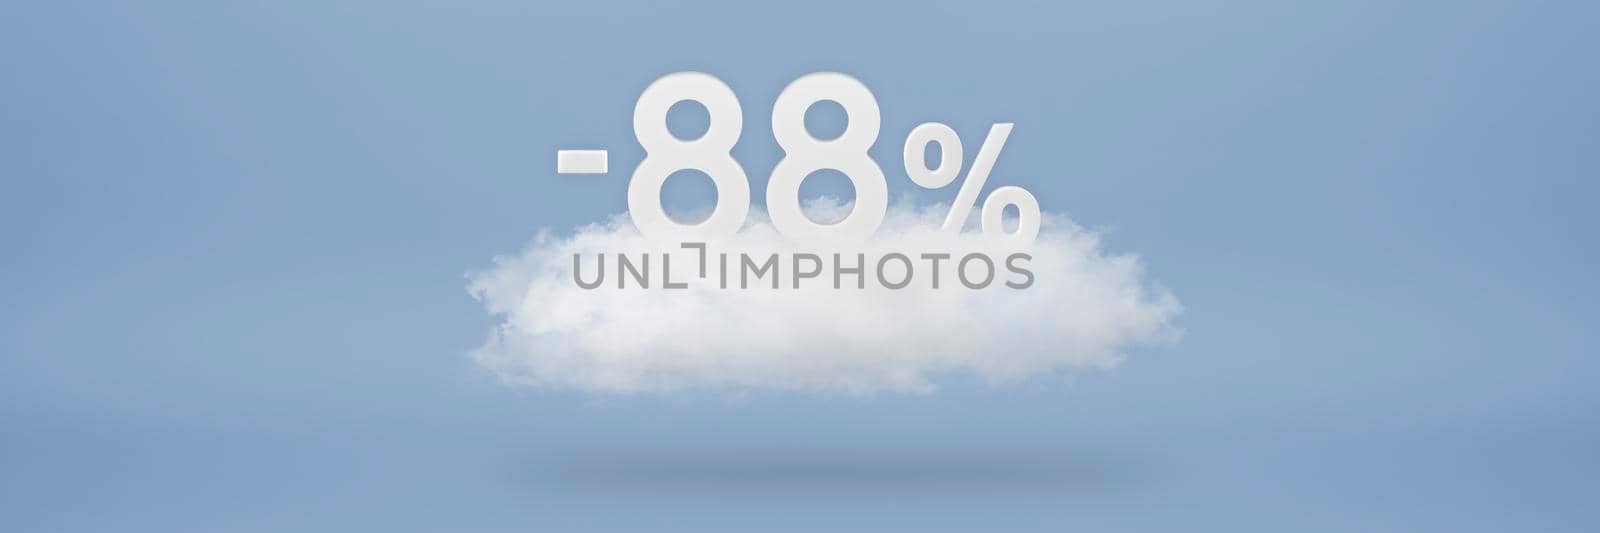 Discount 88 percent. Big discounts, sale up to eighty eight percent. 3D numbers float on a cloud on a blue background. Copy space. Advertising banner and poster to be inserted into the project by SERSOL